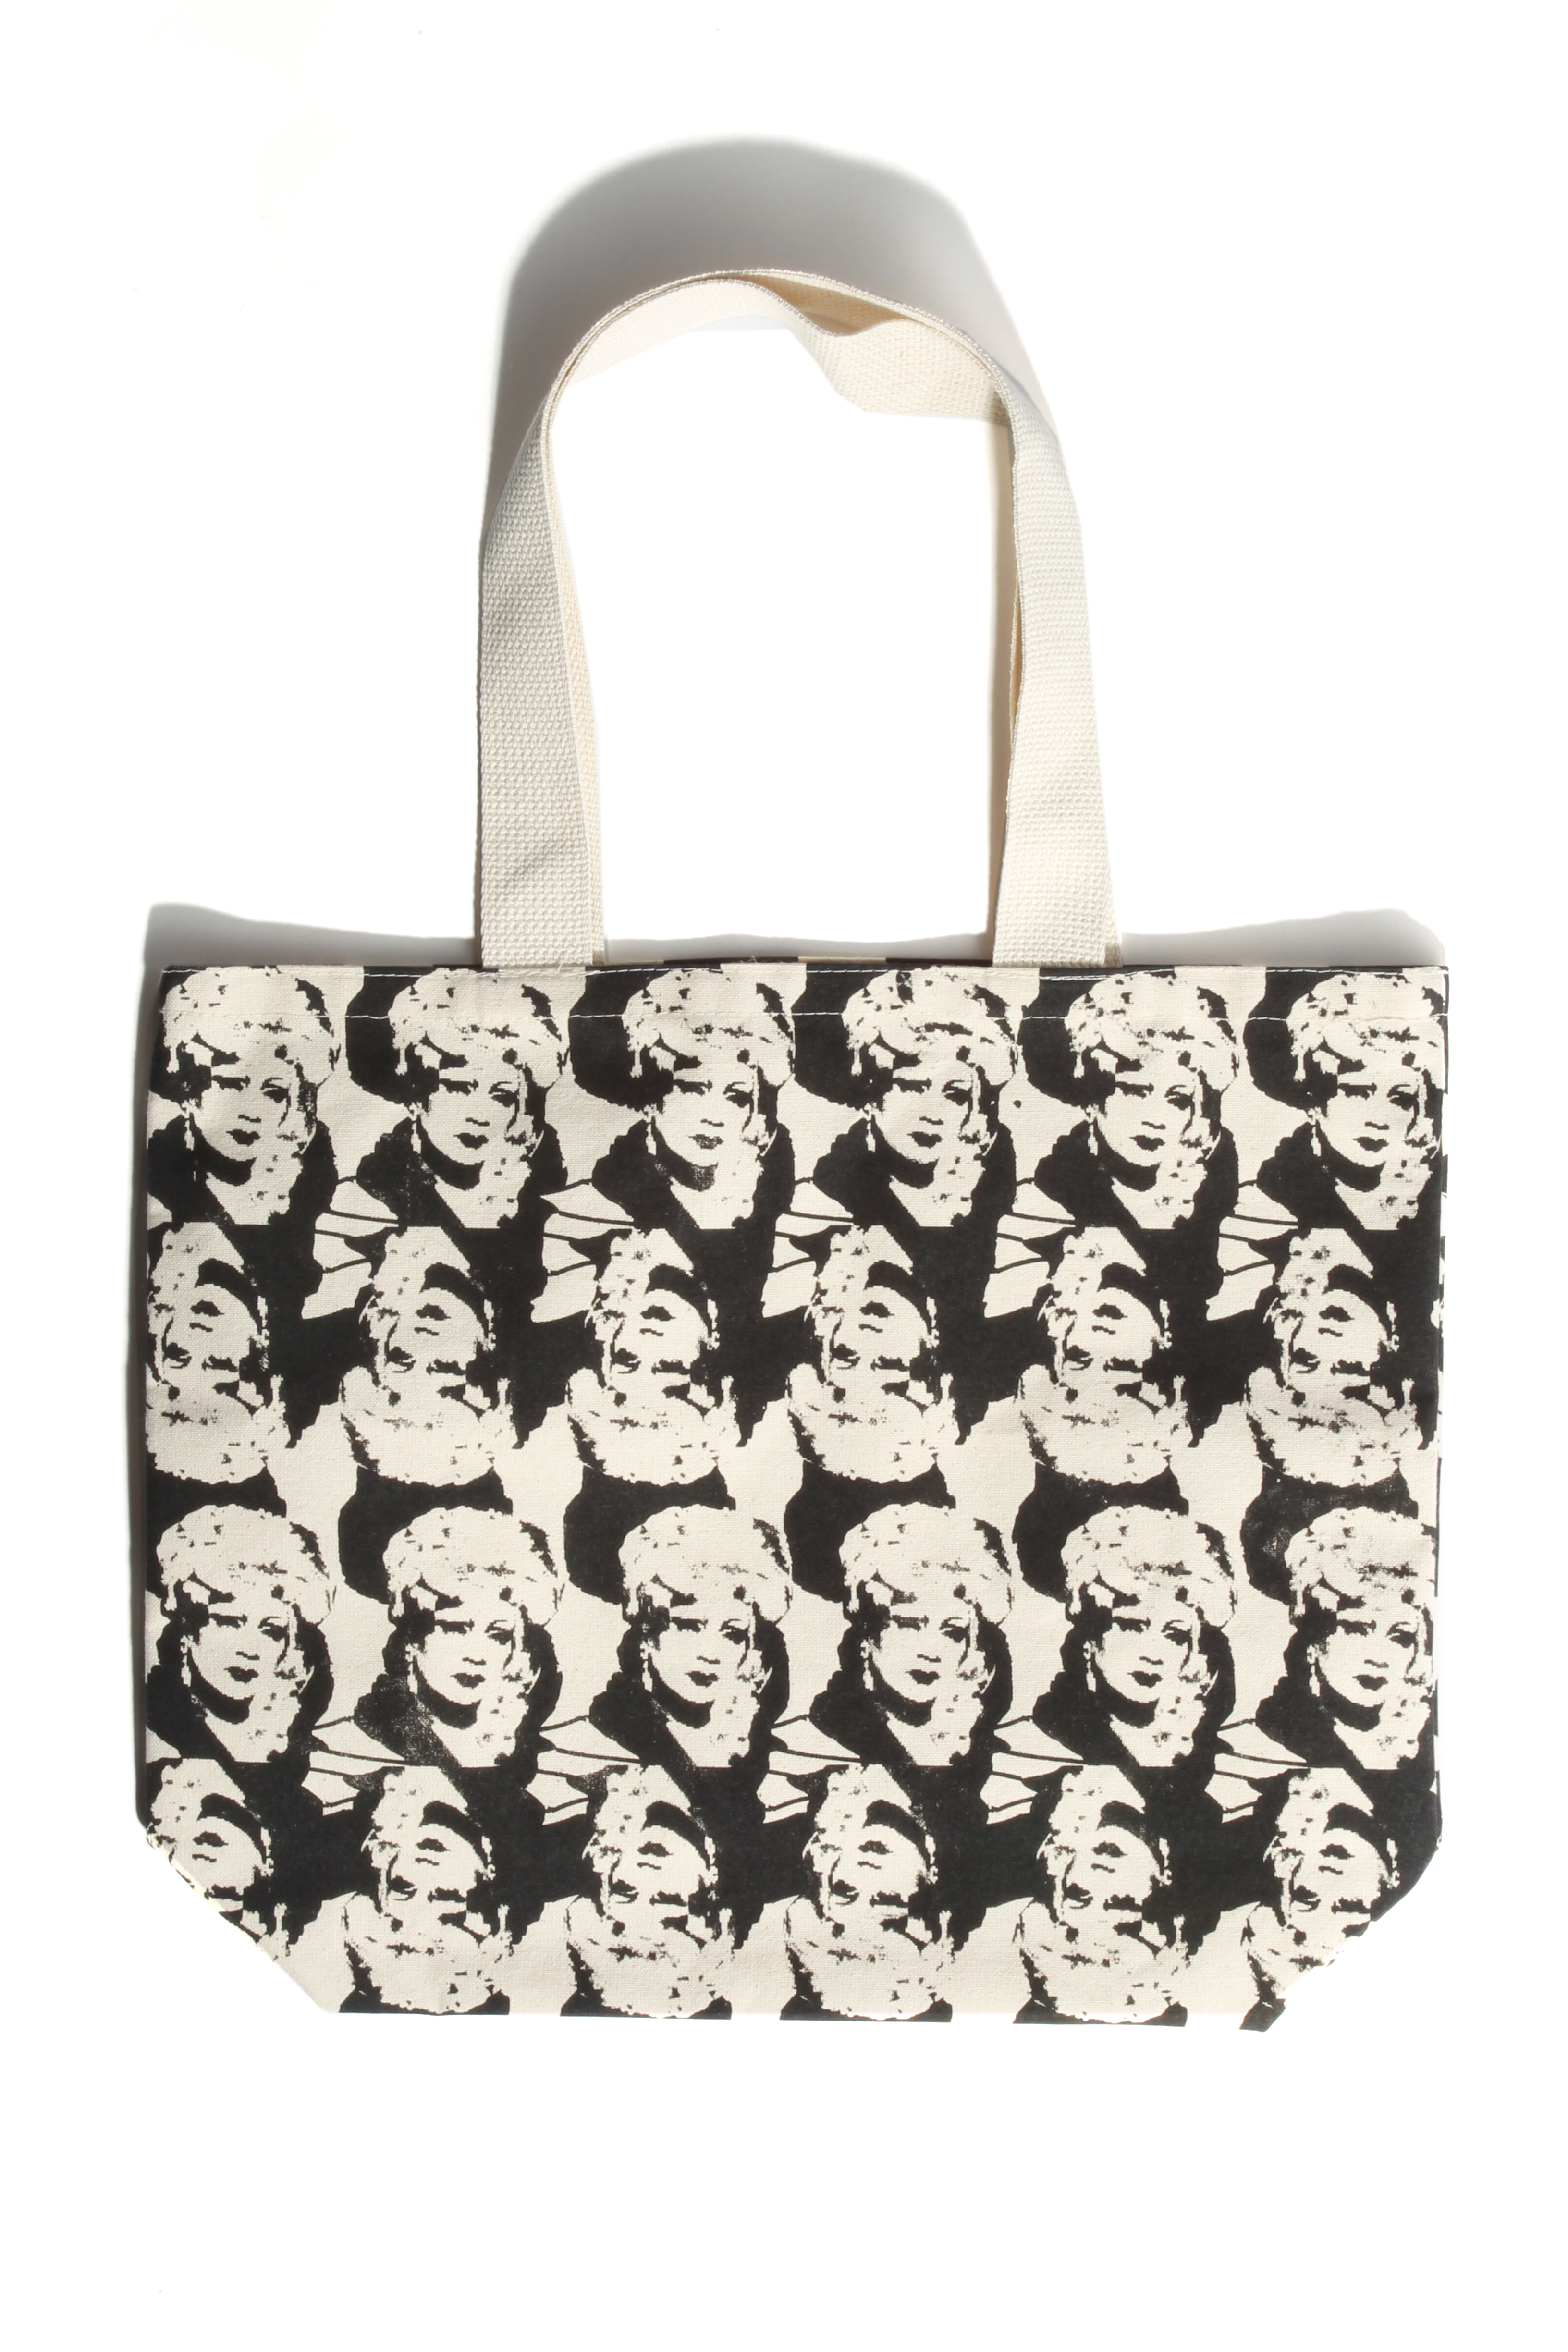 A tote designed by Yun Ling Tham.